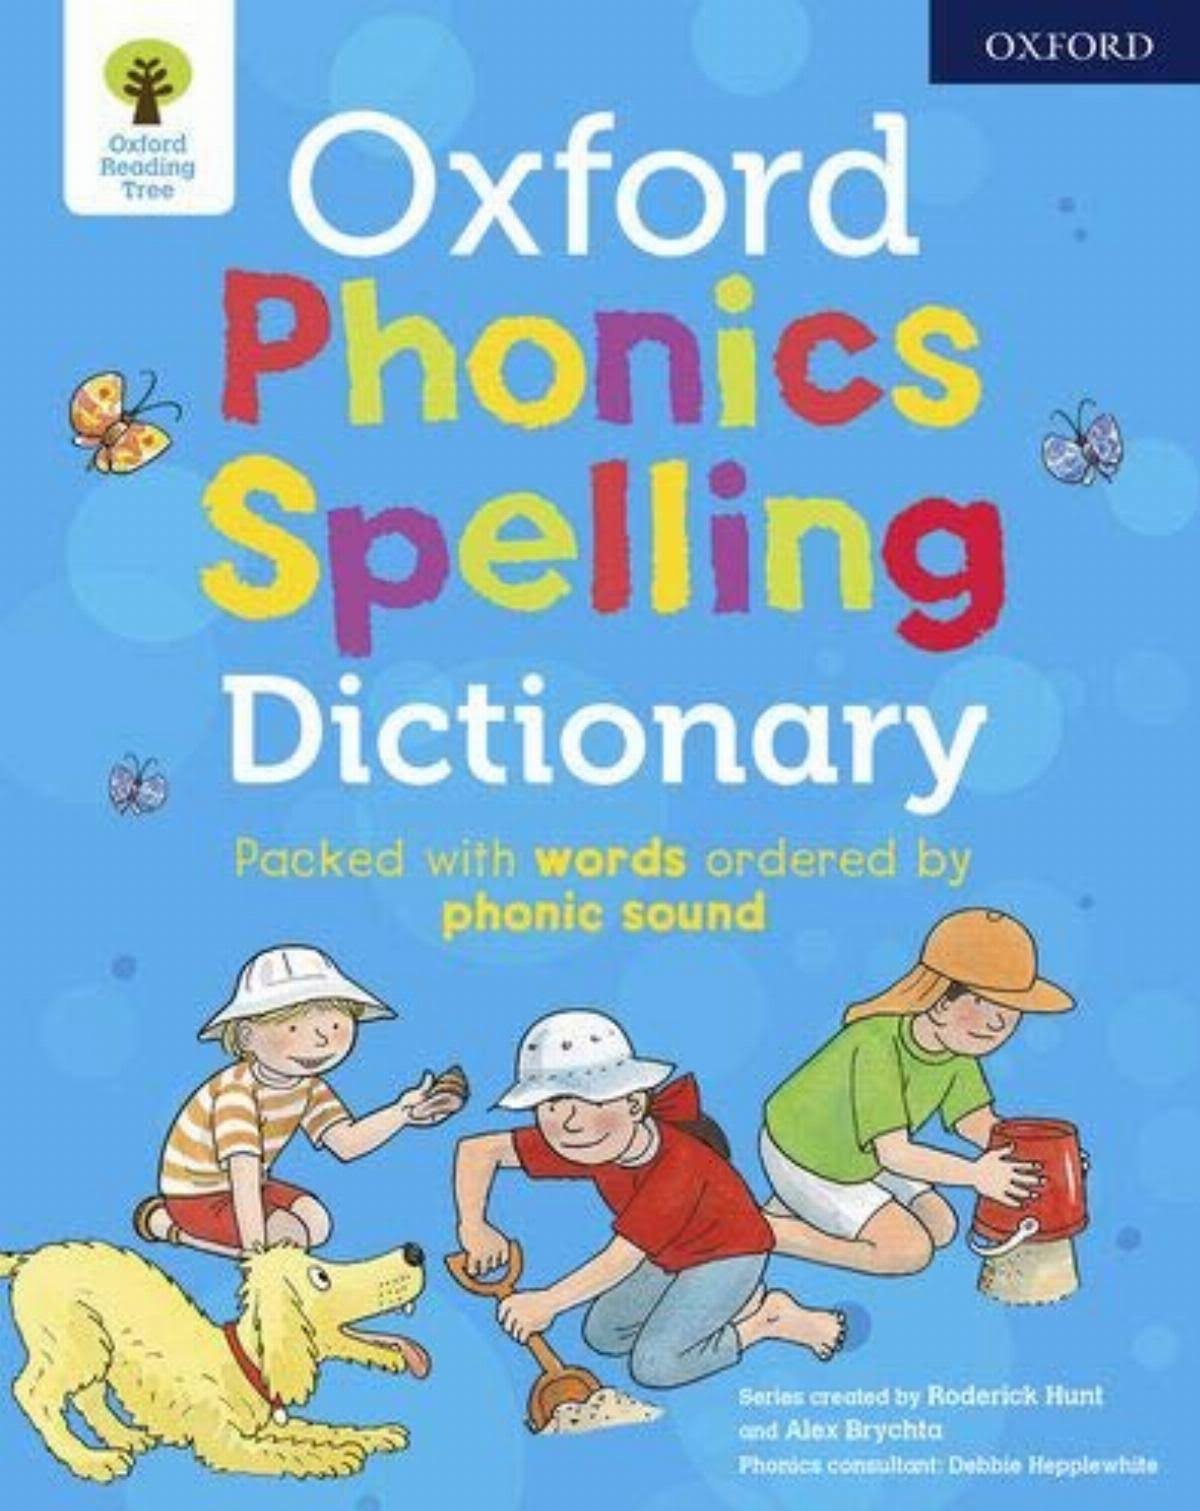 Oxford Phonics Spelling Dictionary [Book]